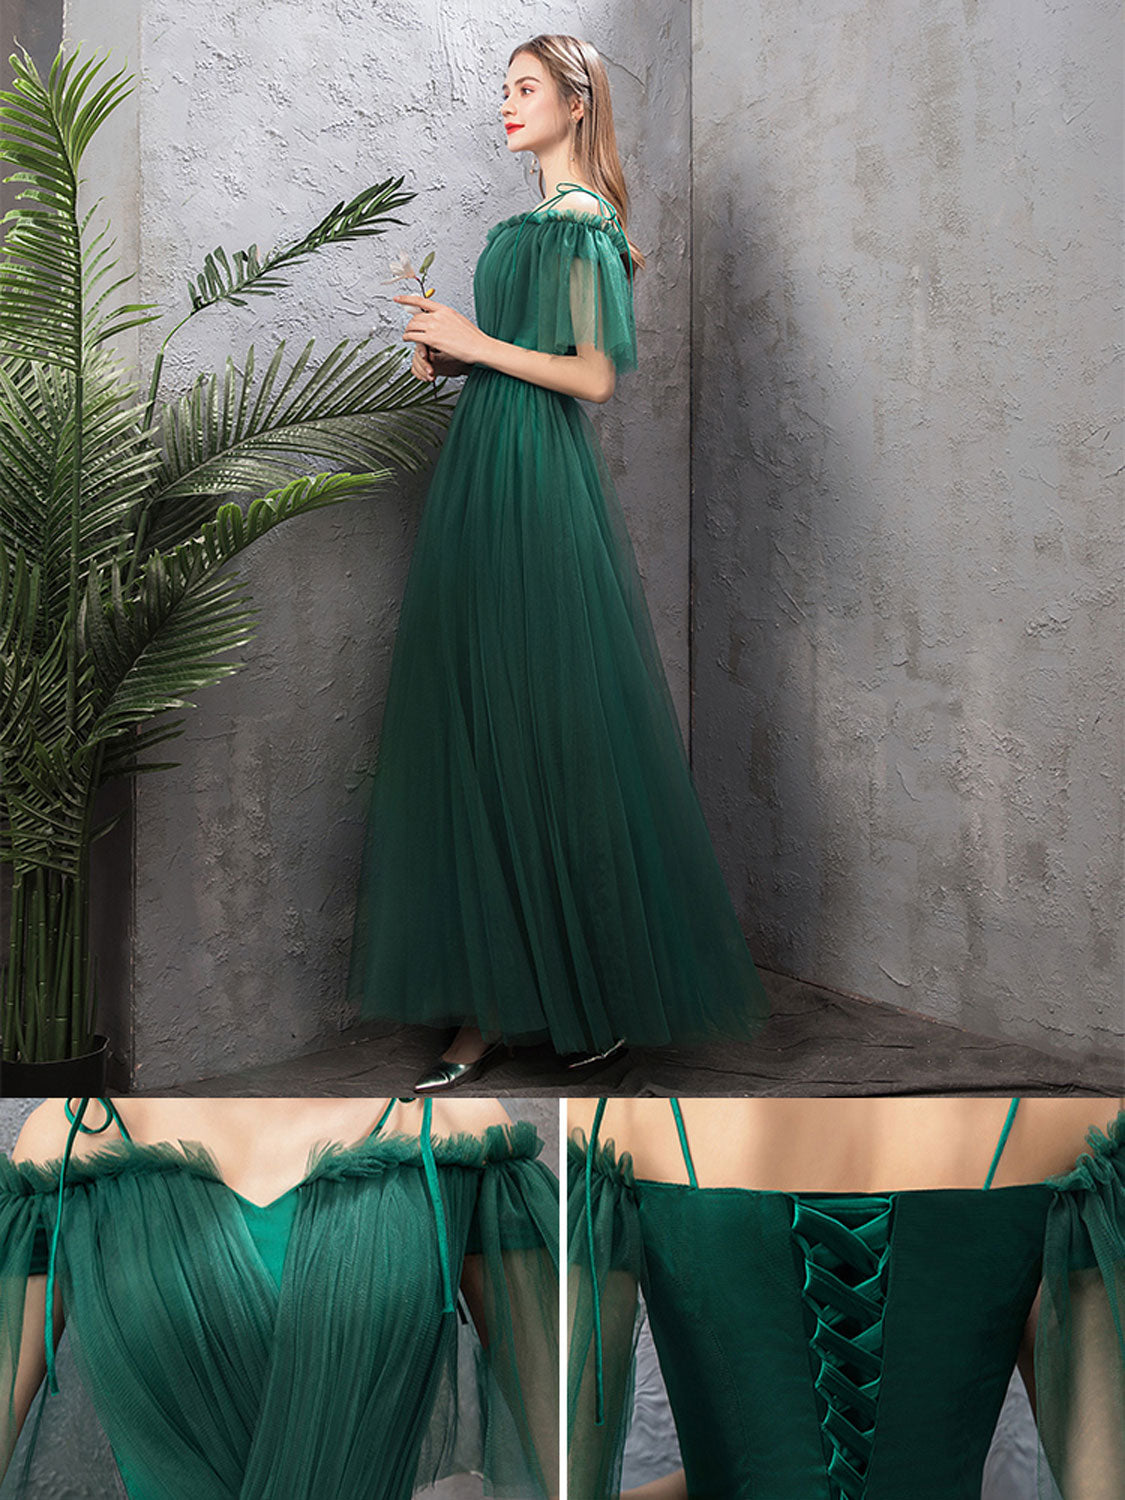 Dolly Gown Olive Green Tulle Fairytale Long Prom Dress